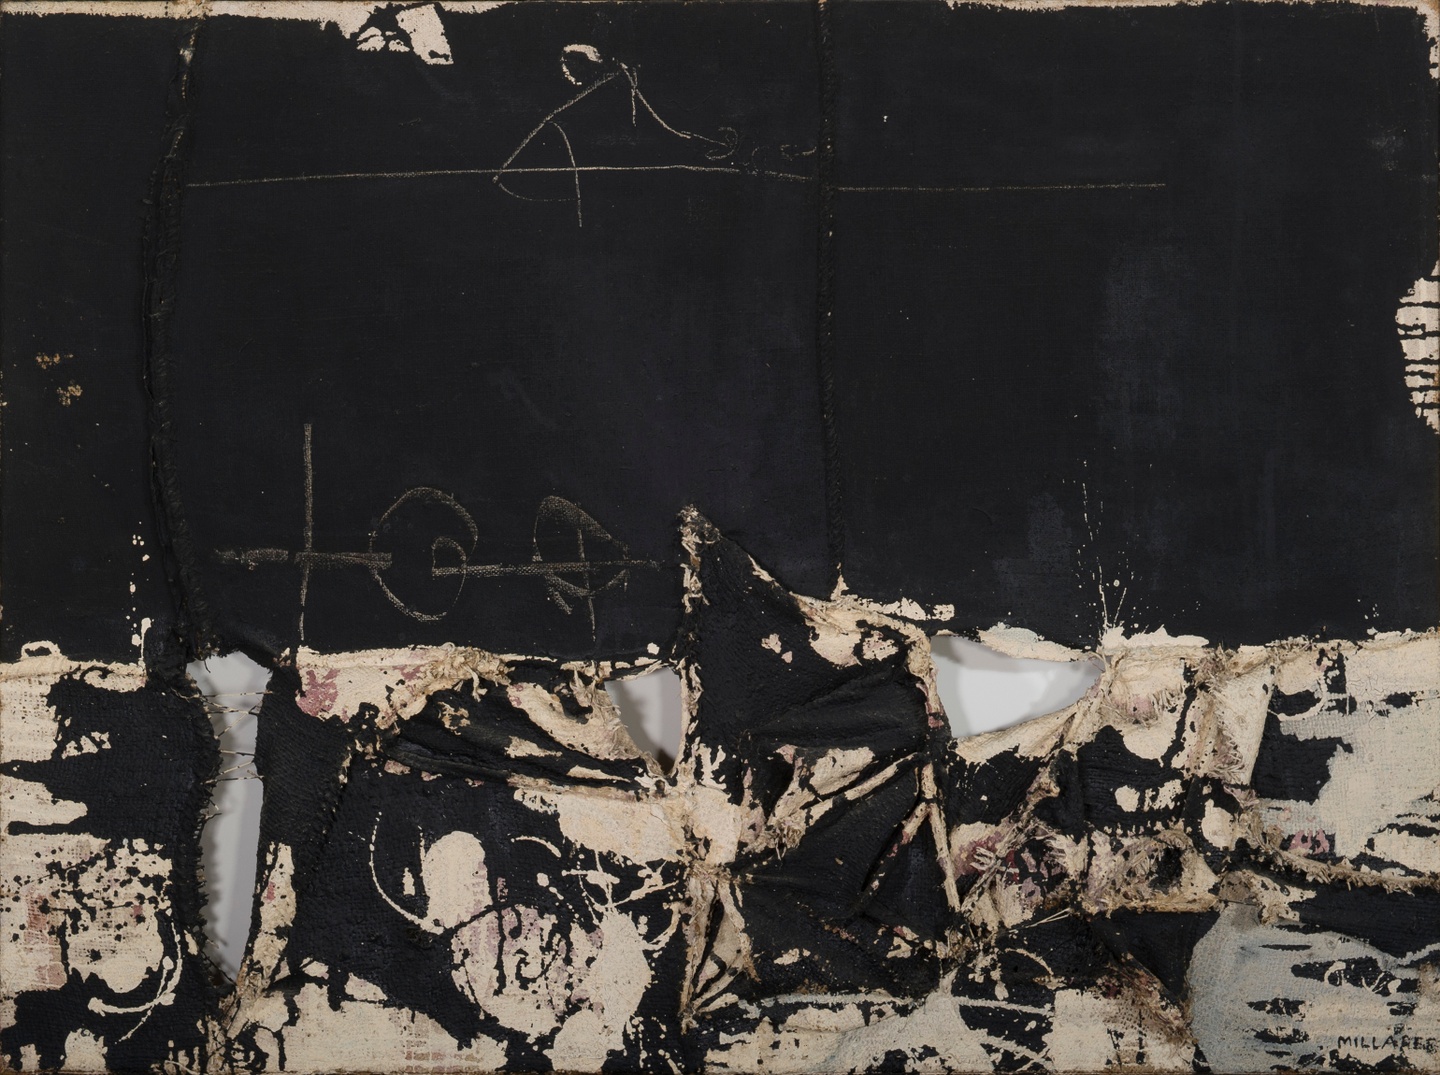 A canvas with black paint covering the top half and splatters of black paint and ripped sections of canvas in the lower half